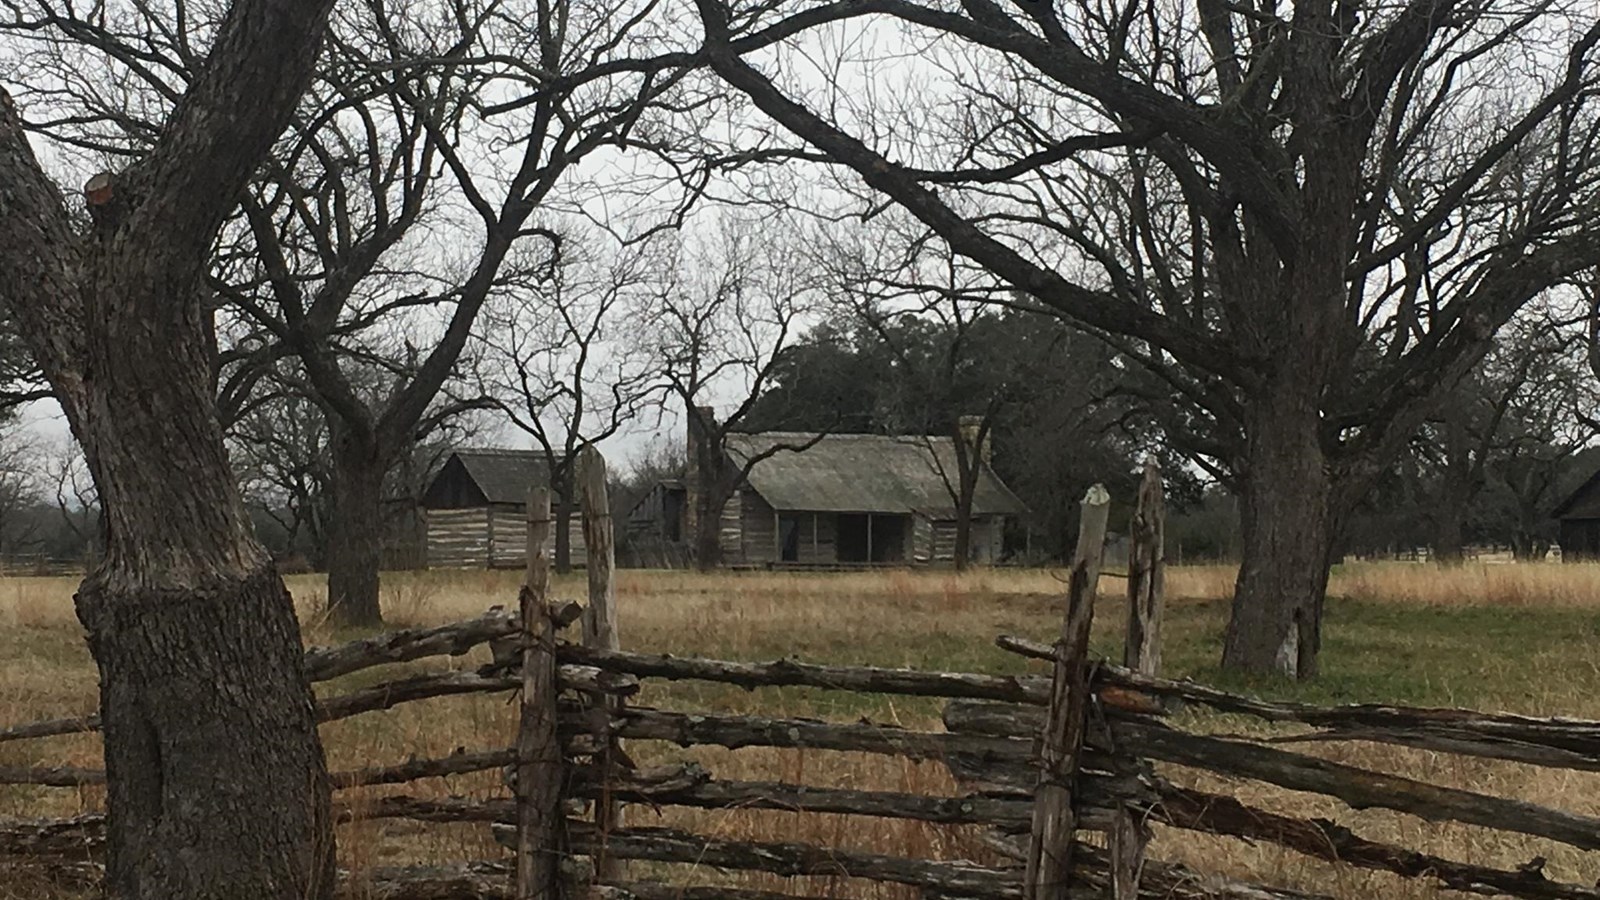 Past a nearby wooden fence under leafless trees, there are historic structures in the far distance.